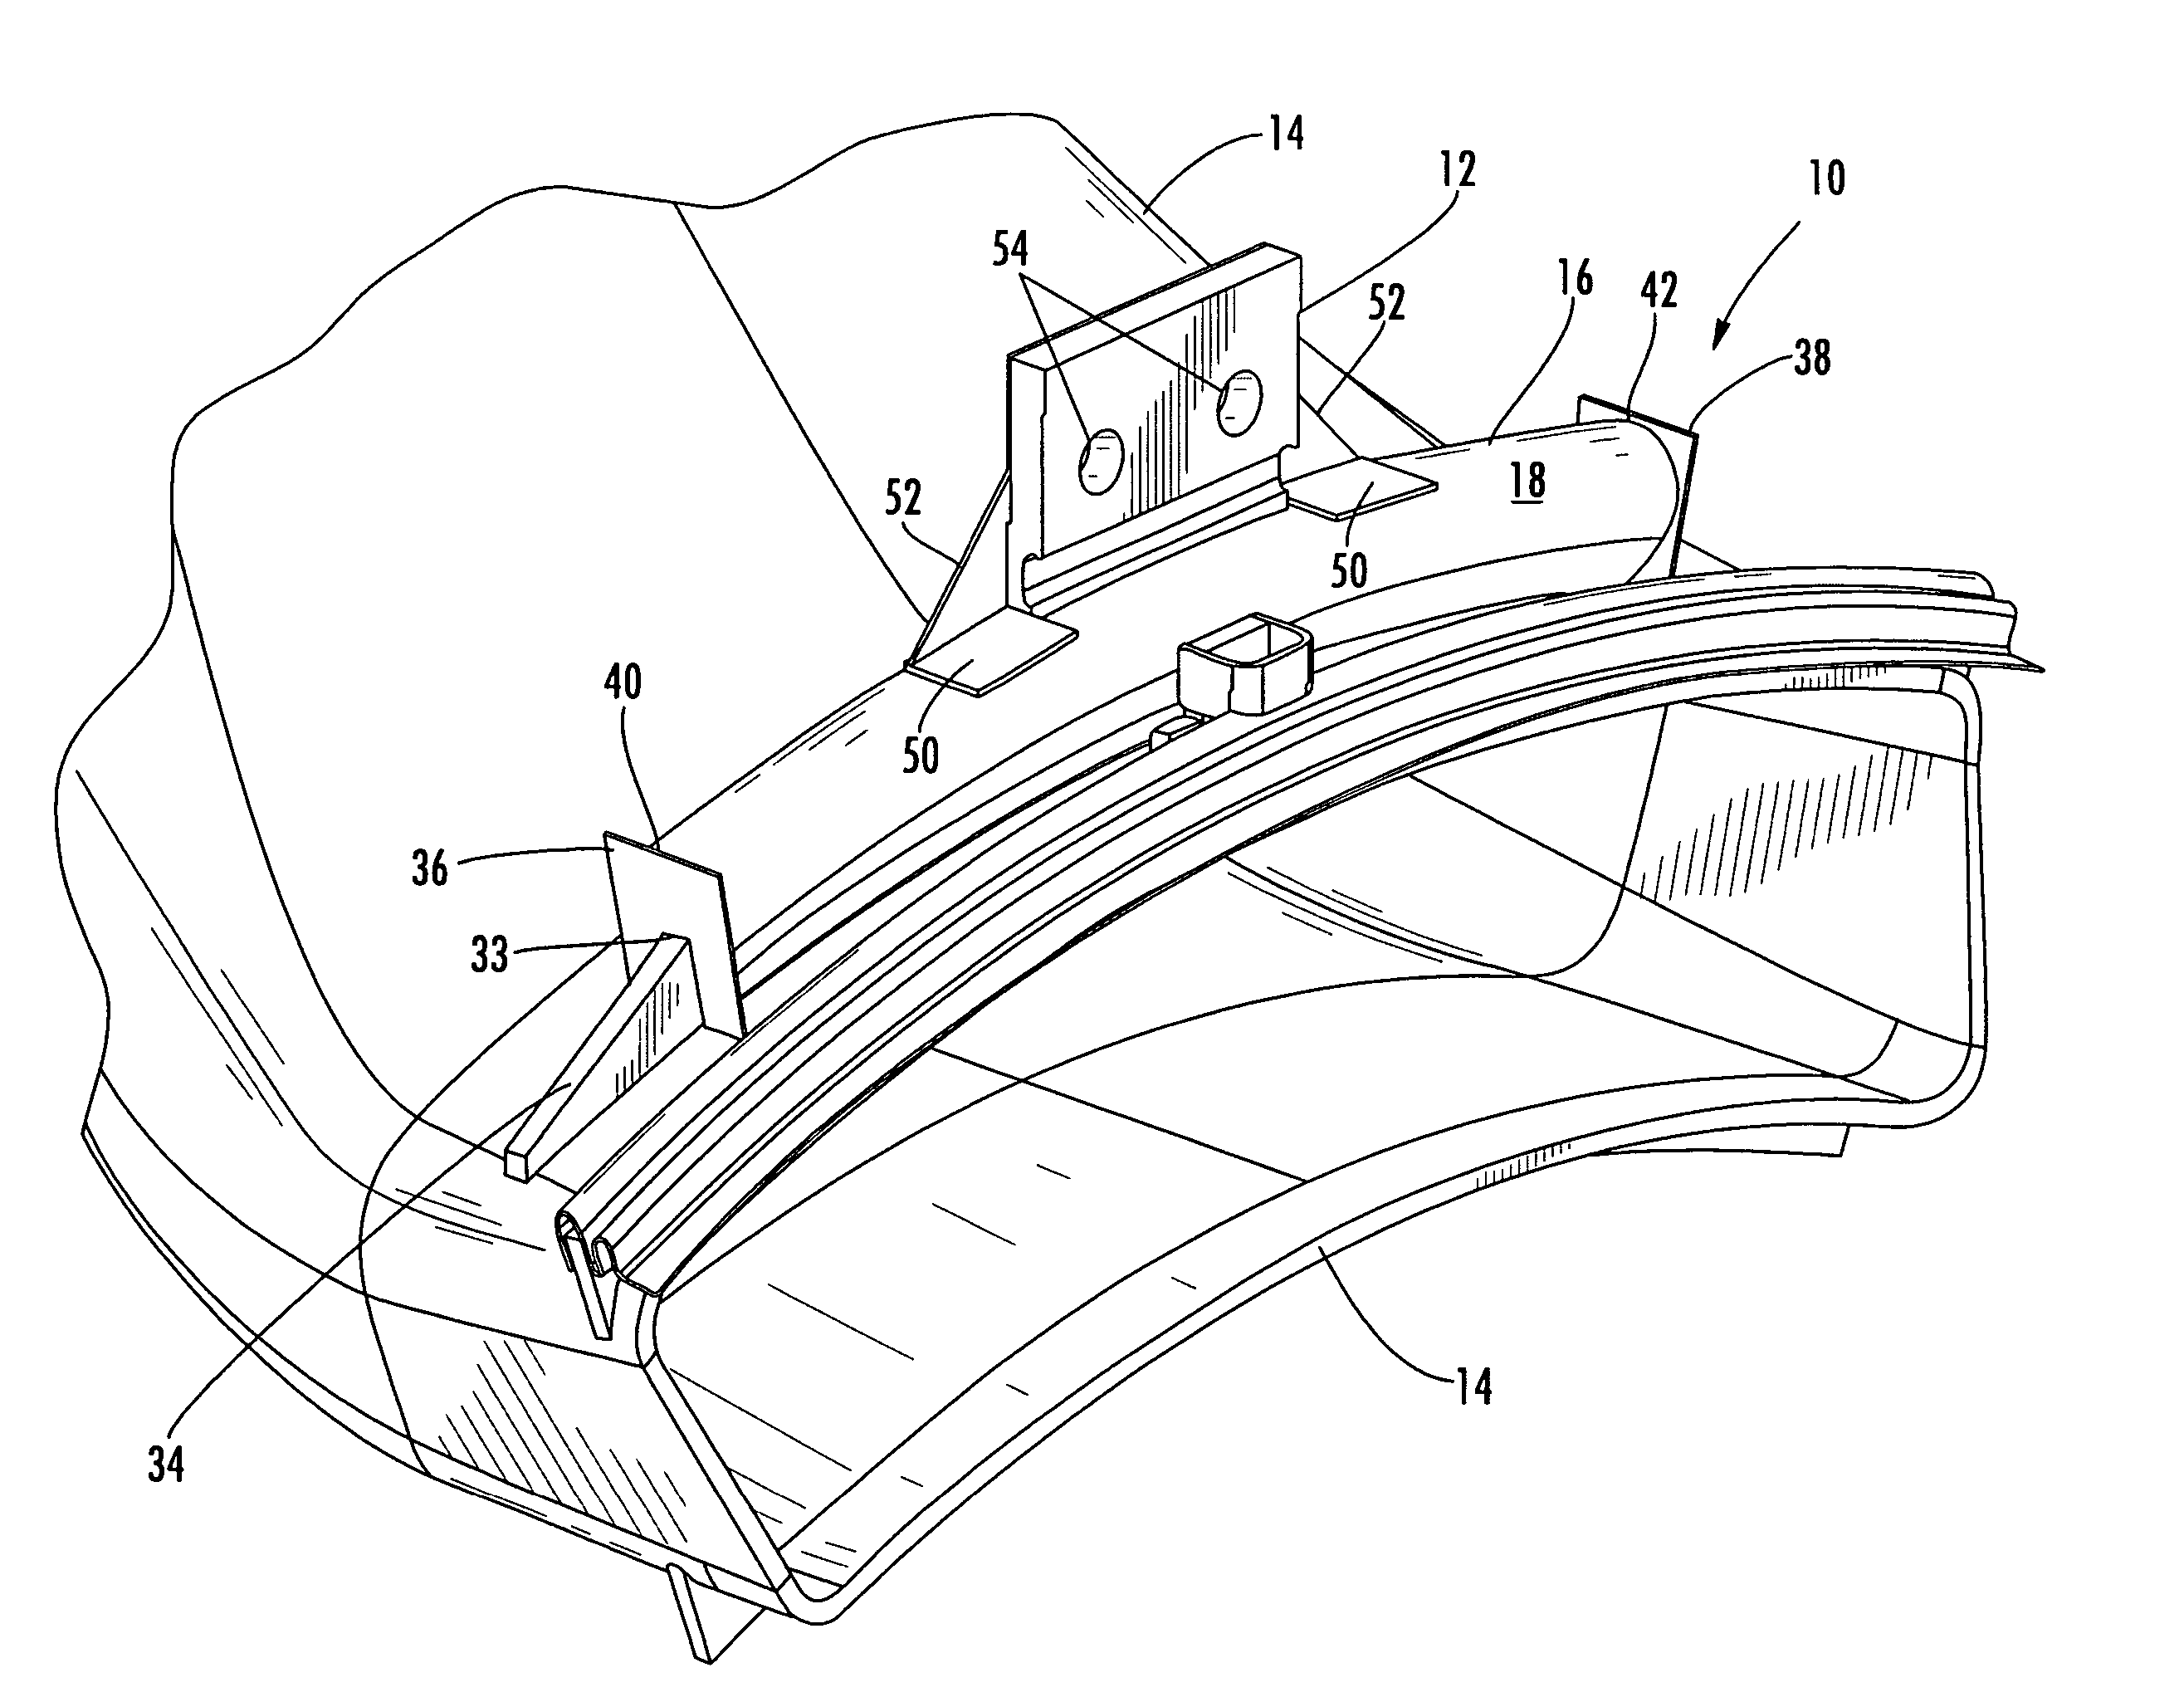 Cooling system for a transition bracket of a transition in a turbine engine